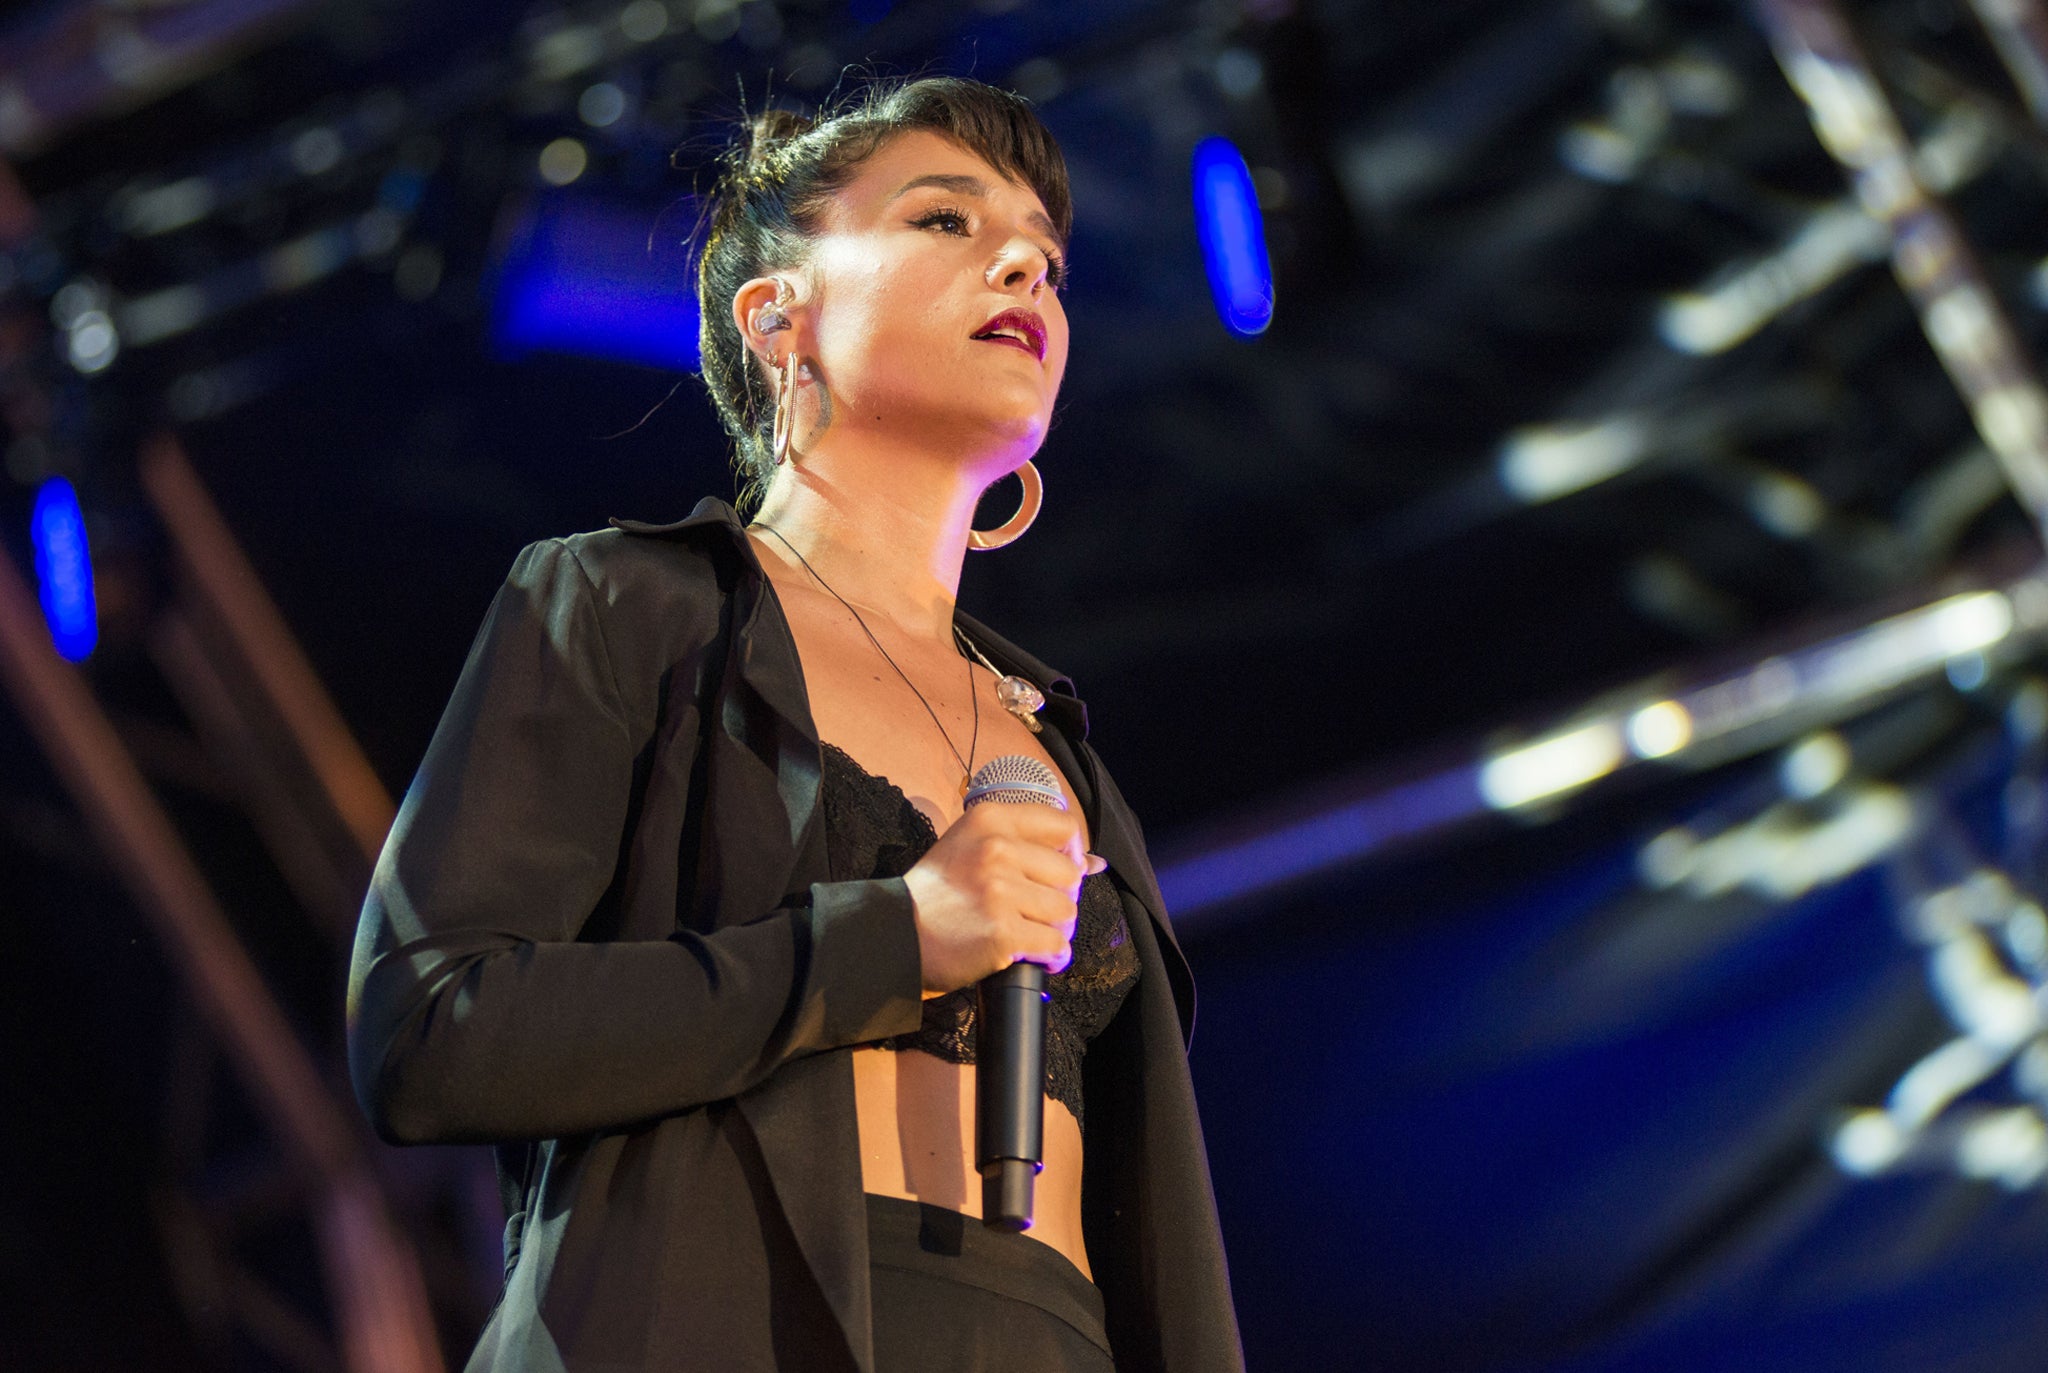 Jessie Ware performs at Somerset House